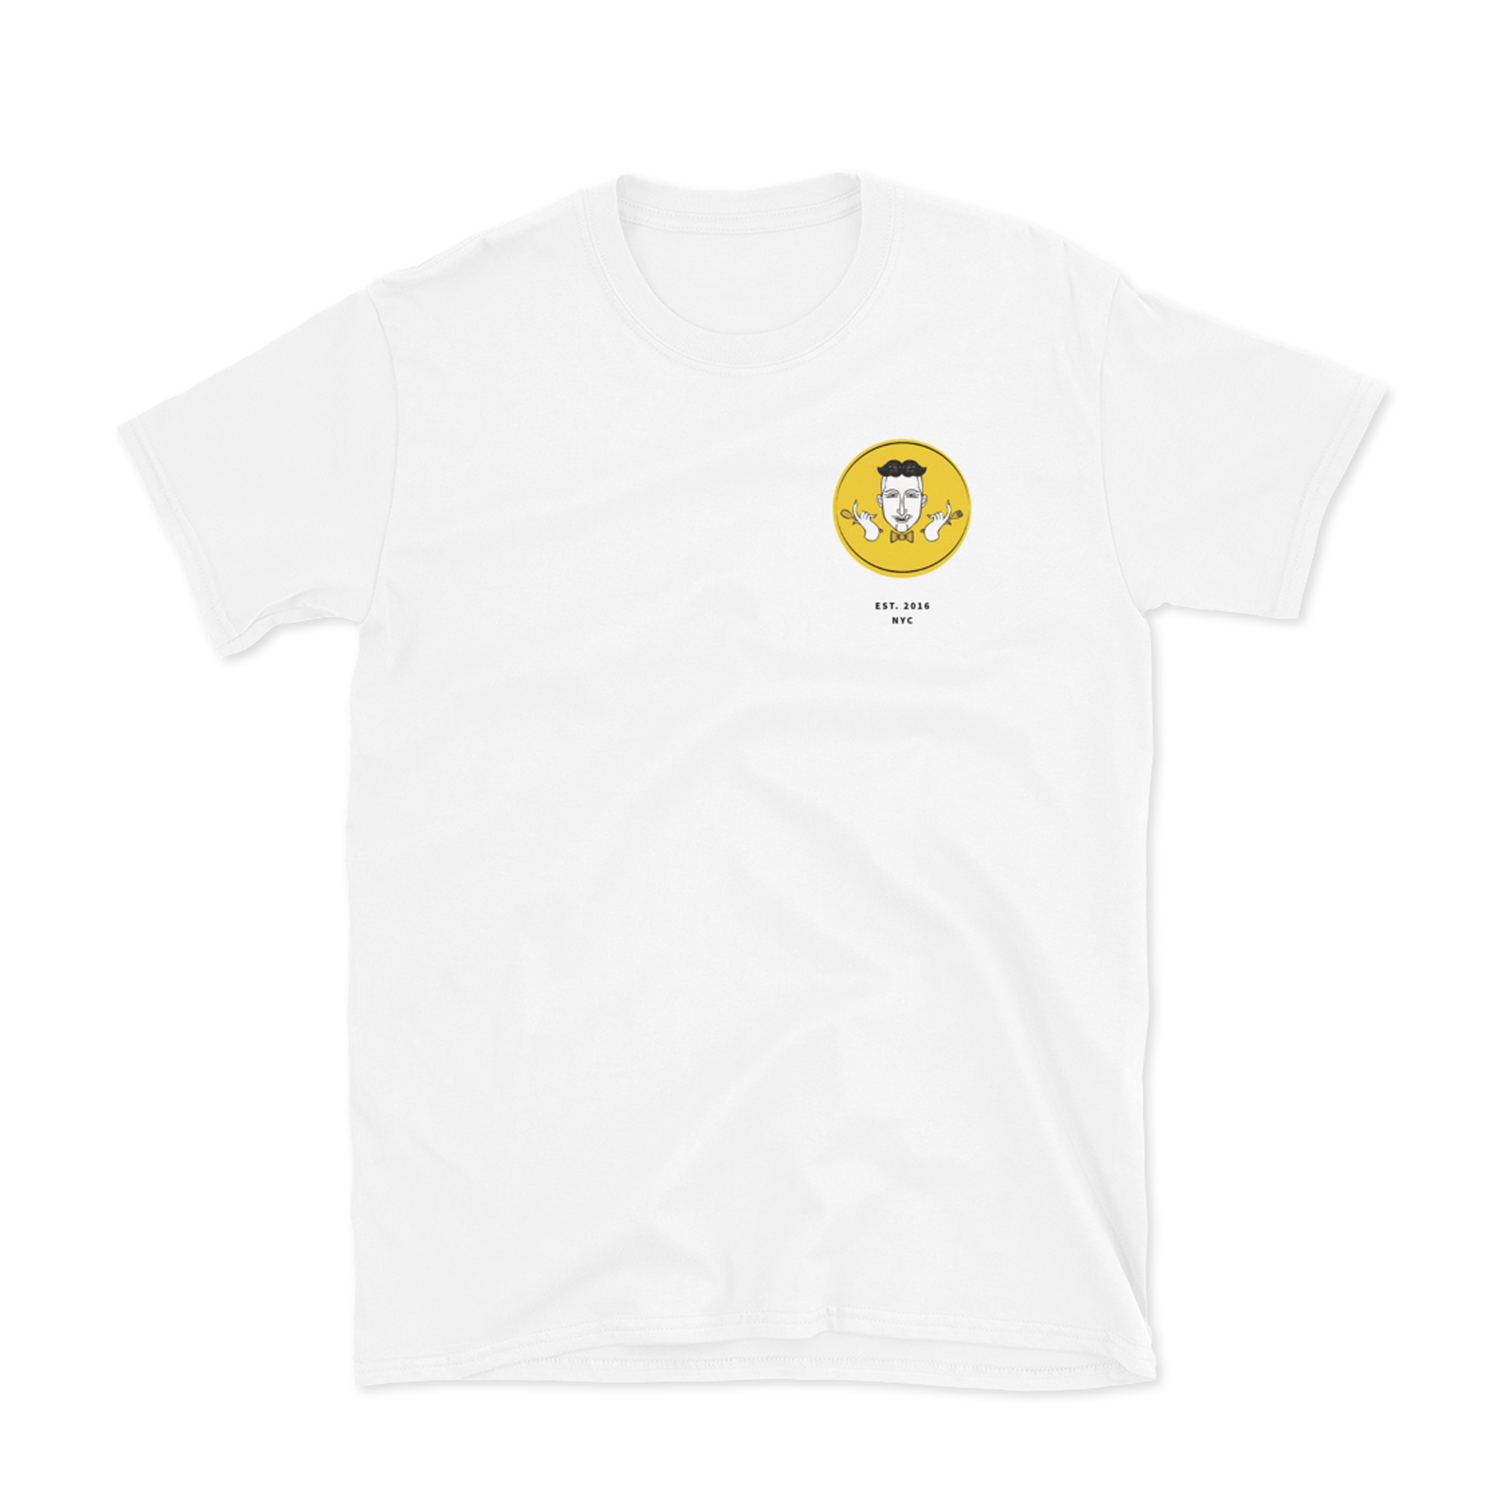 shopify-thailicious_product-image-Tshirt_02.png